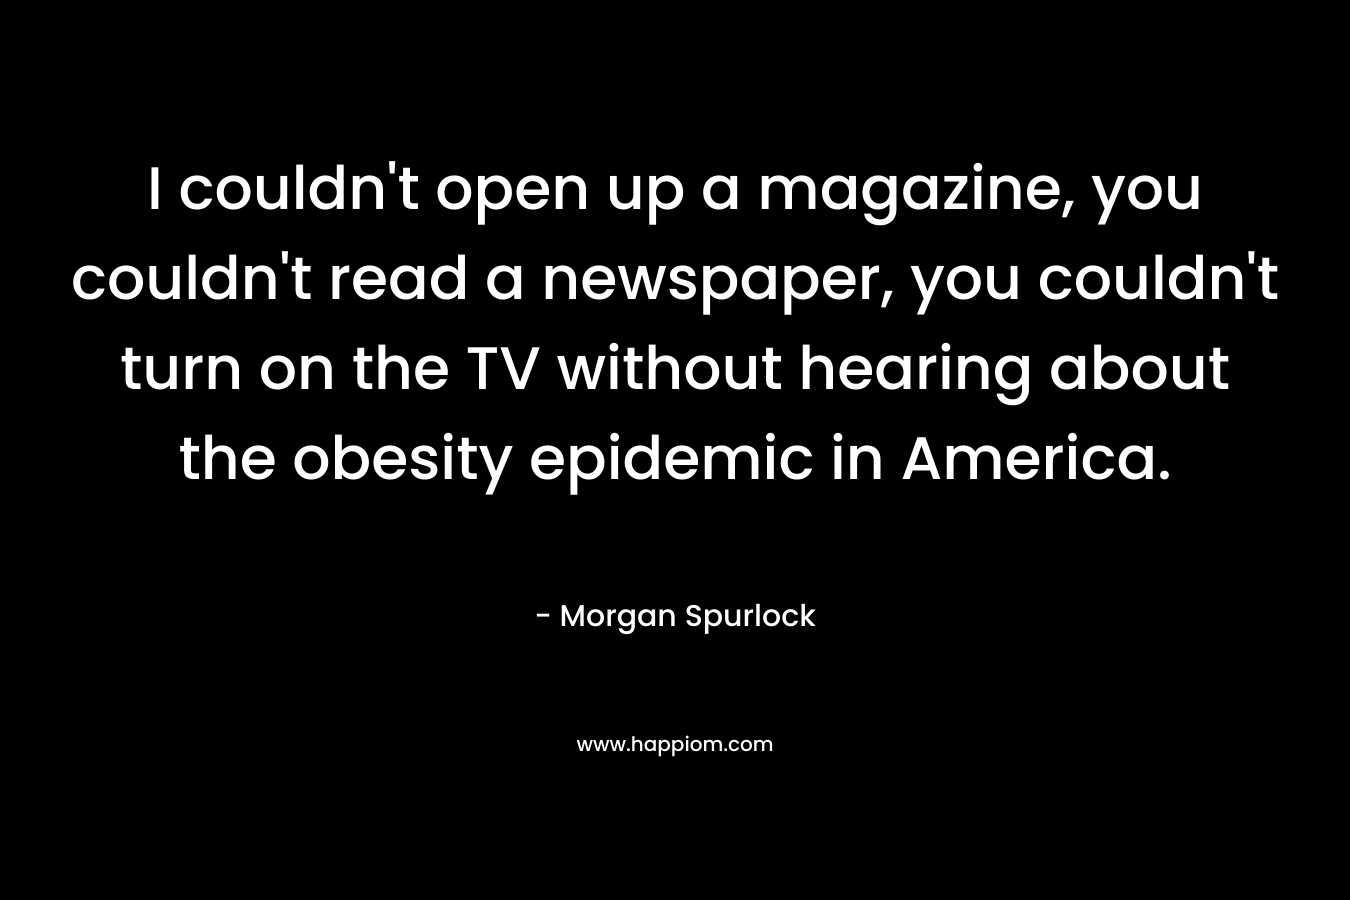 I couldn’t open up a magazine, you couldn’t read a newspaper, you couldn’t turn on the TV without hearing about the obesity epidemic in America. – Morgan Spurlock